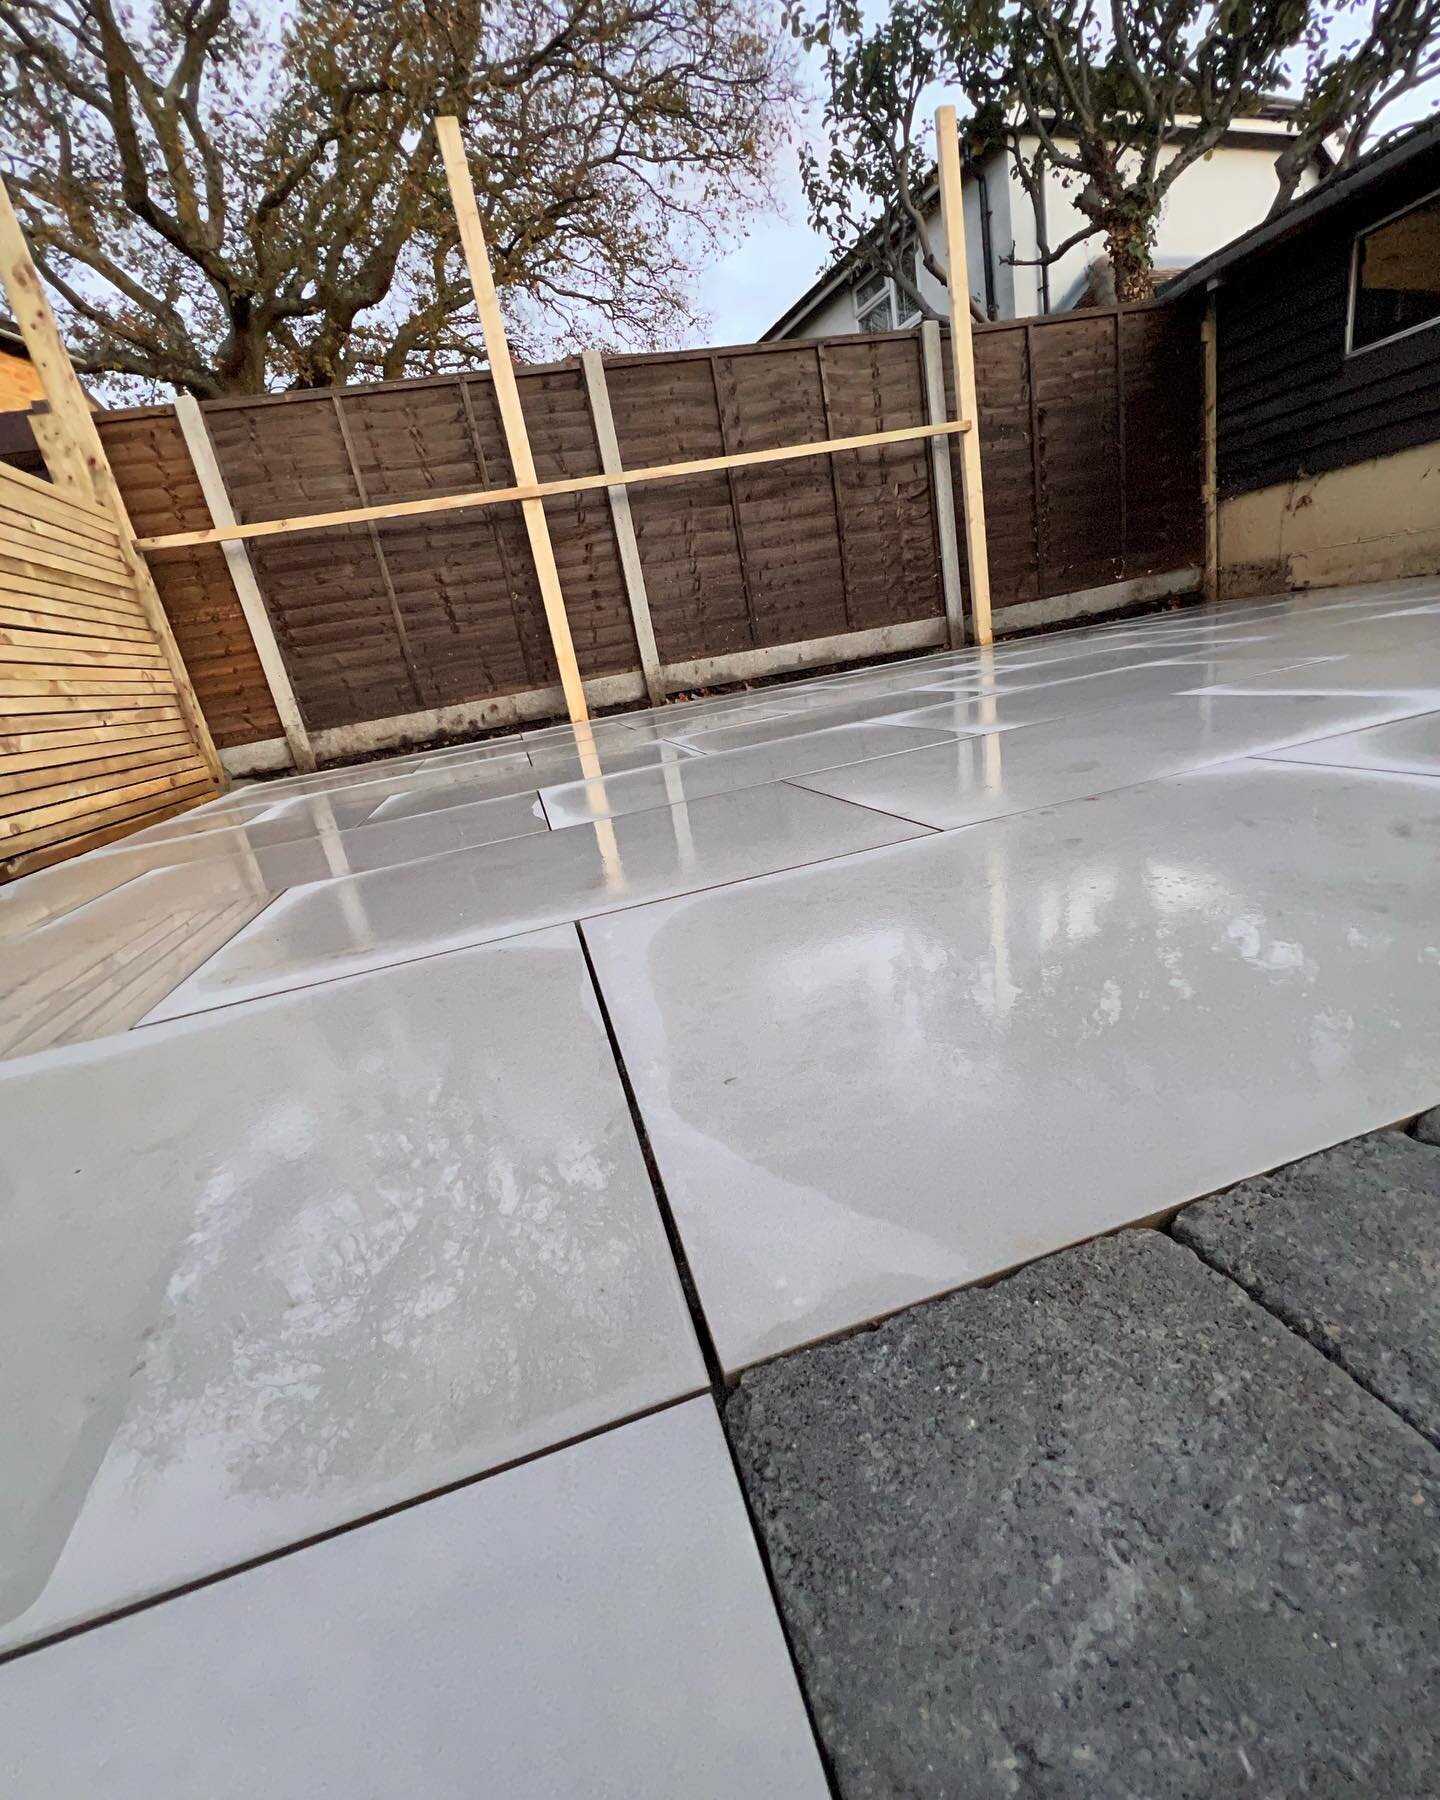 This garden space is coming along nicely taking out trees and levelling the ground making it all on one level, its really showing the space that you can make in a garden, with installing a patio at both ends of the garden and a new long batton fence,